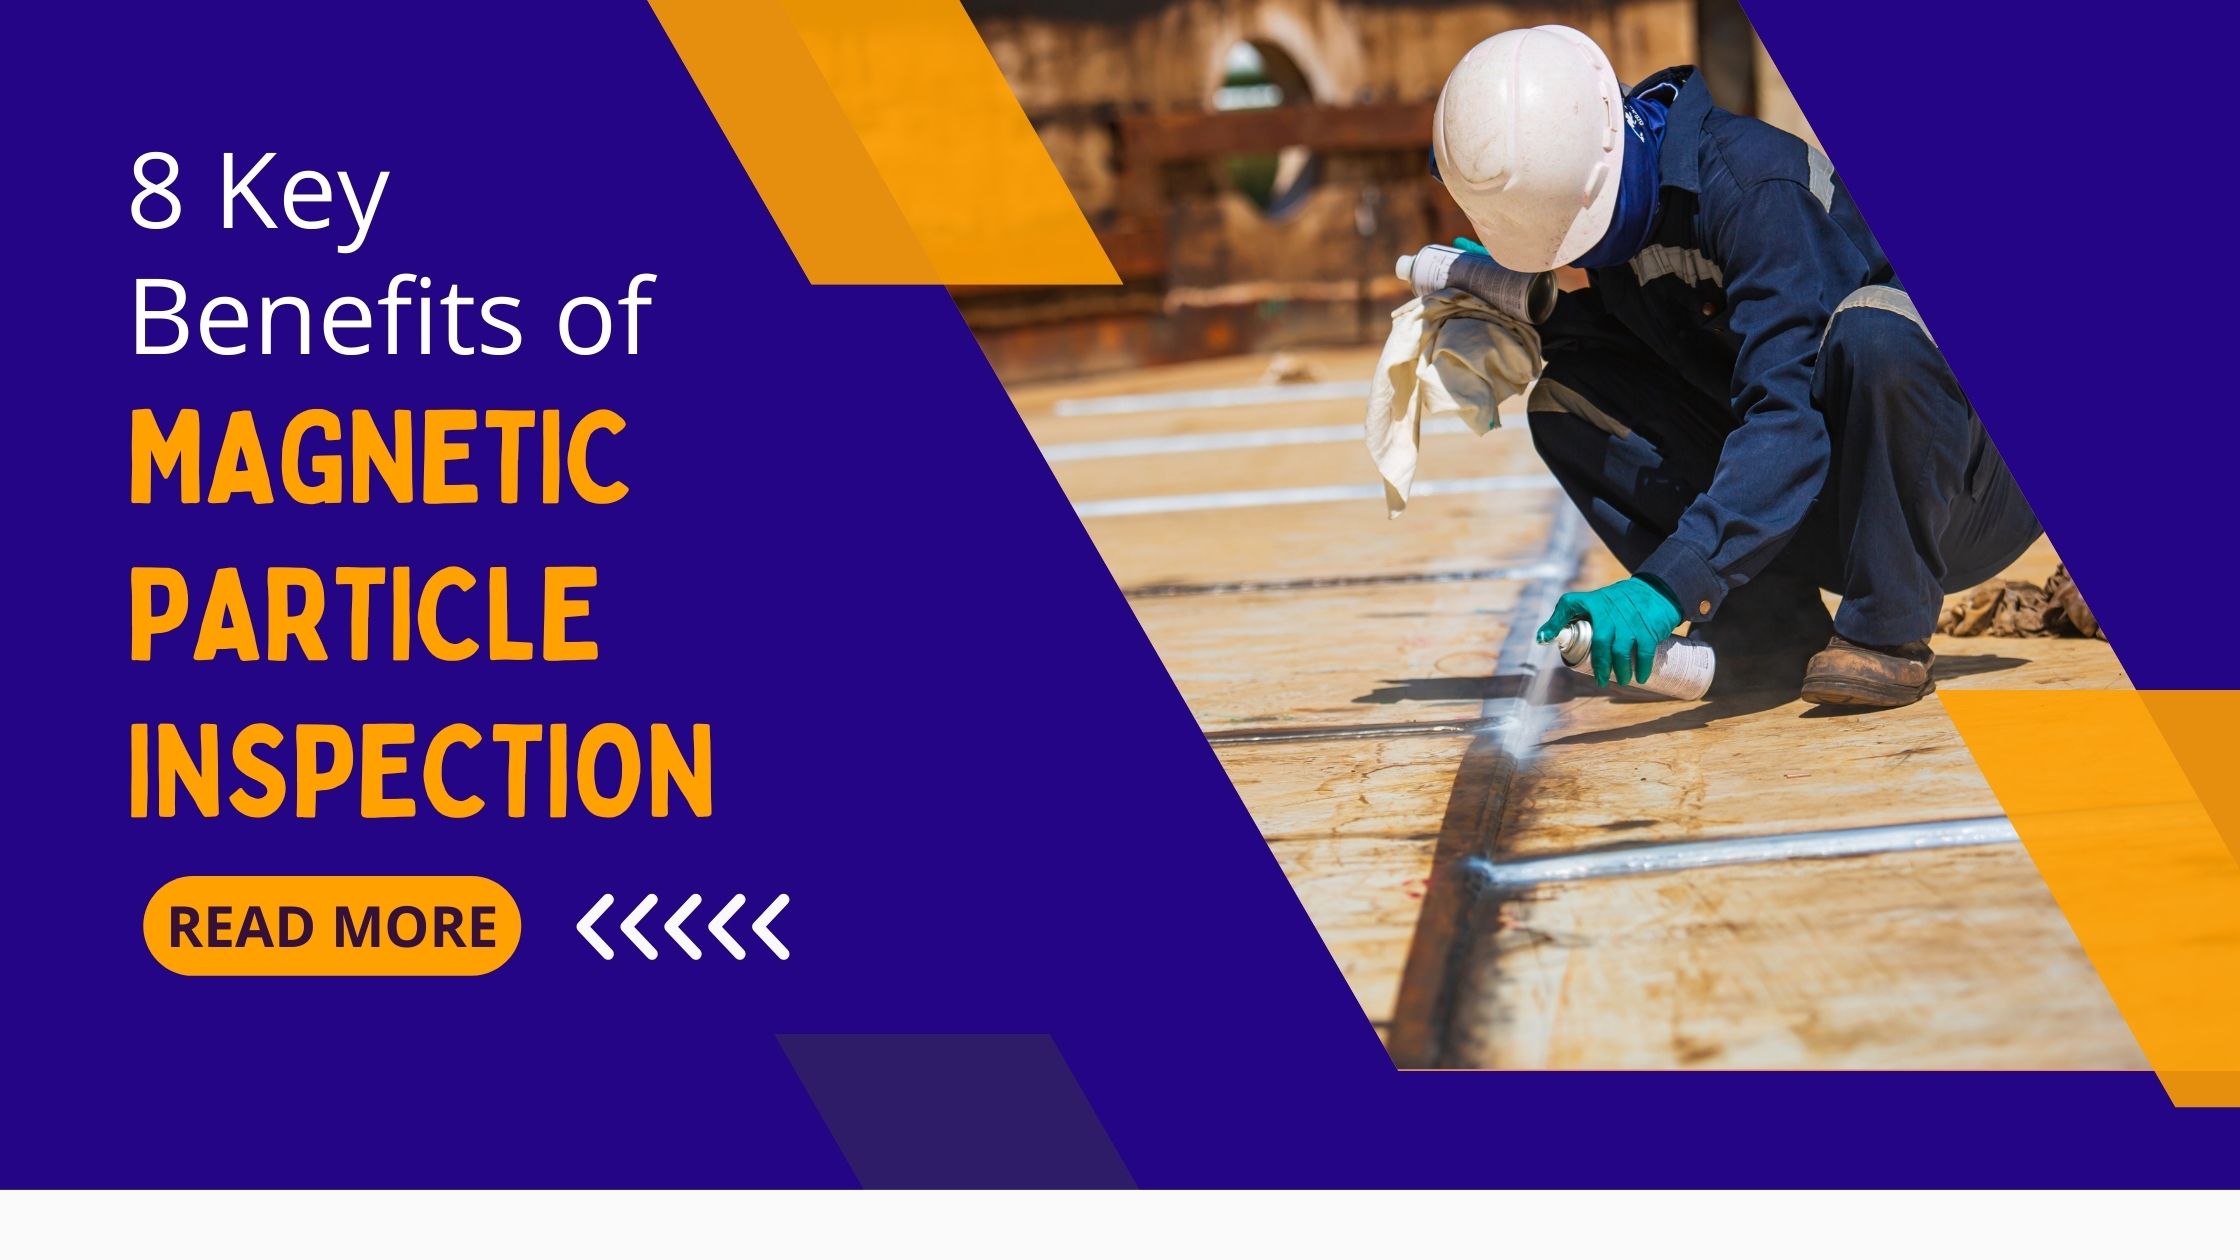 8 Key Benefits of Magnetic Particle Inspection